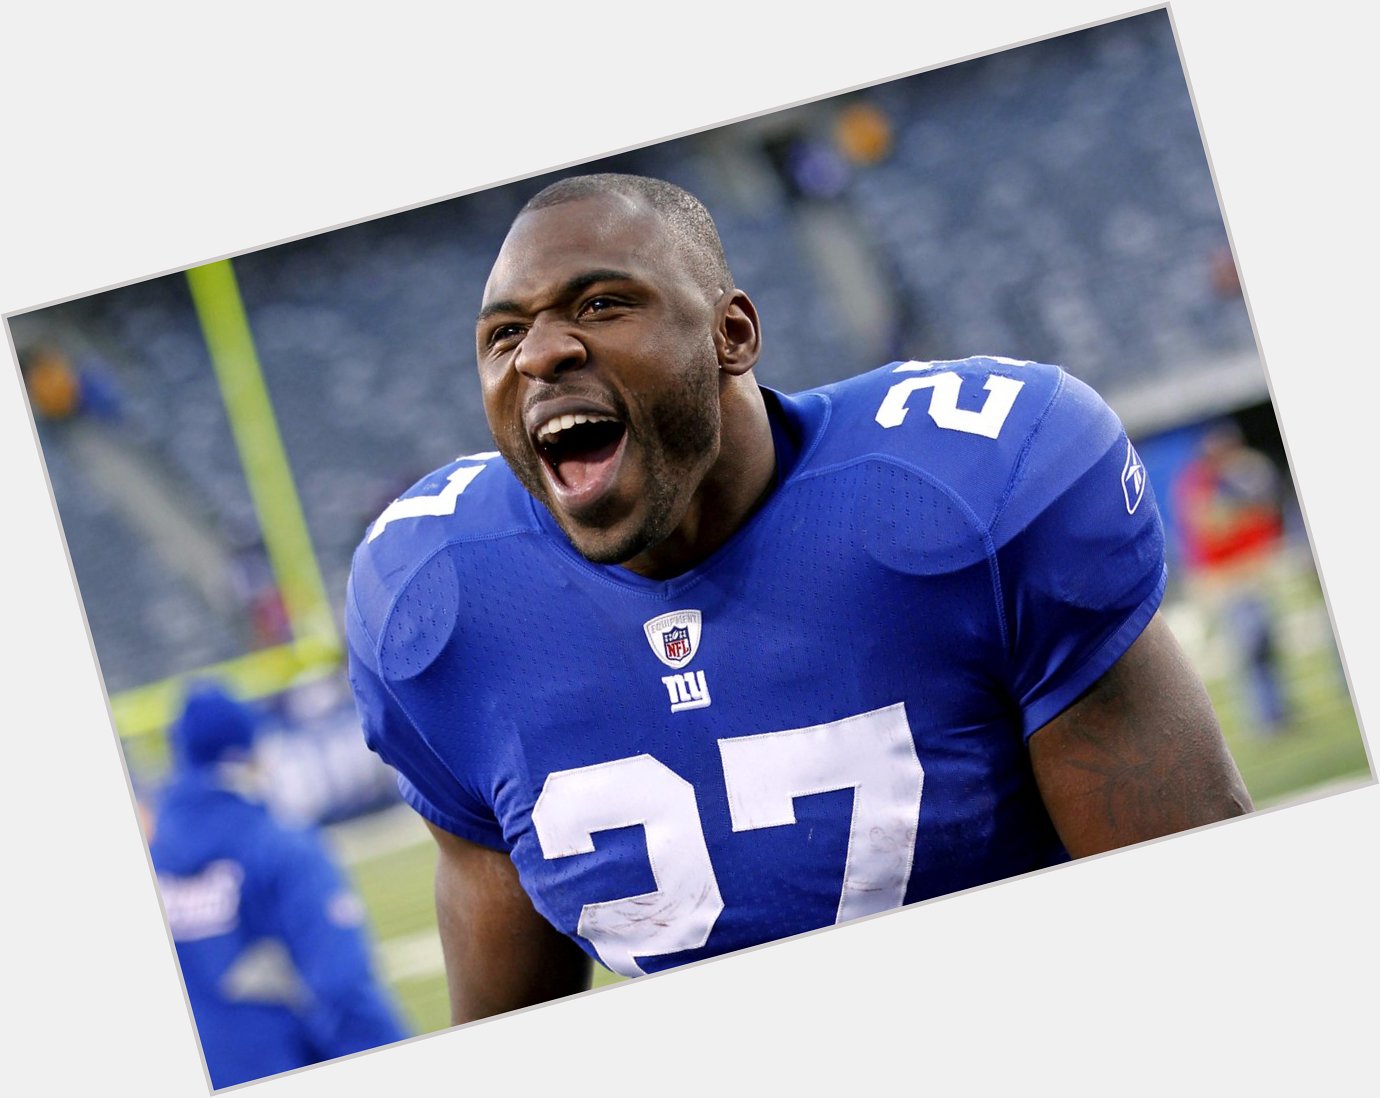 Happy 33rd birthday to the one and only Brandon Jacobs! Congratulations 